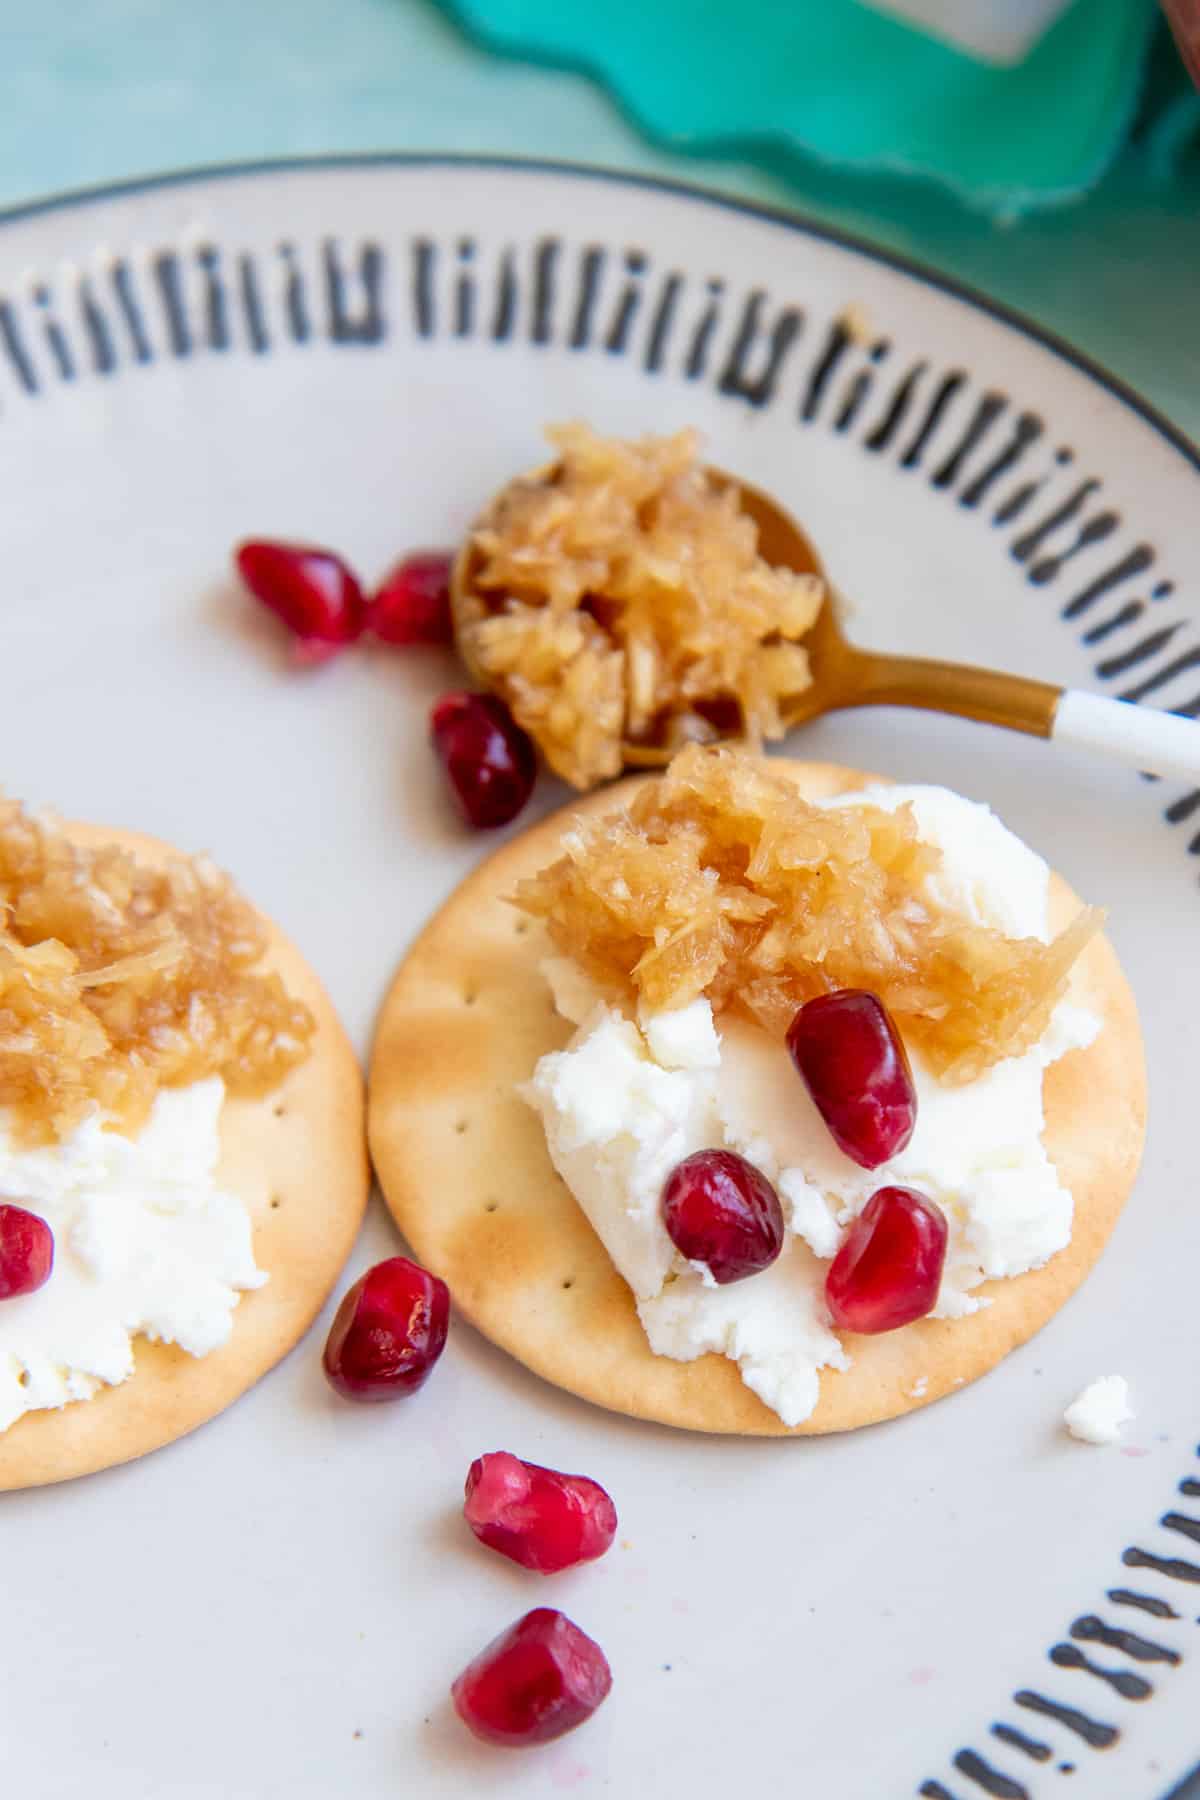 Thin wafer crackers spread with goat cheese and garnished with pomegranate arils and a horseradish honey condiment.